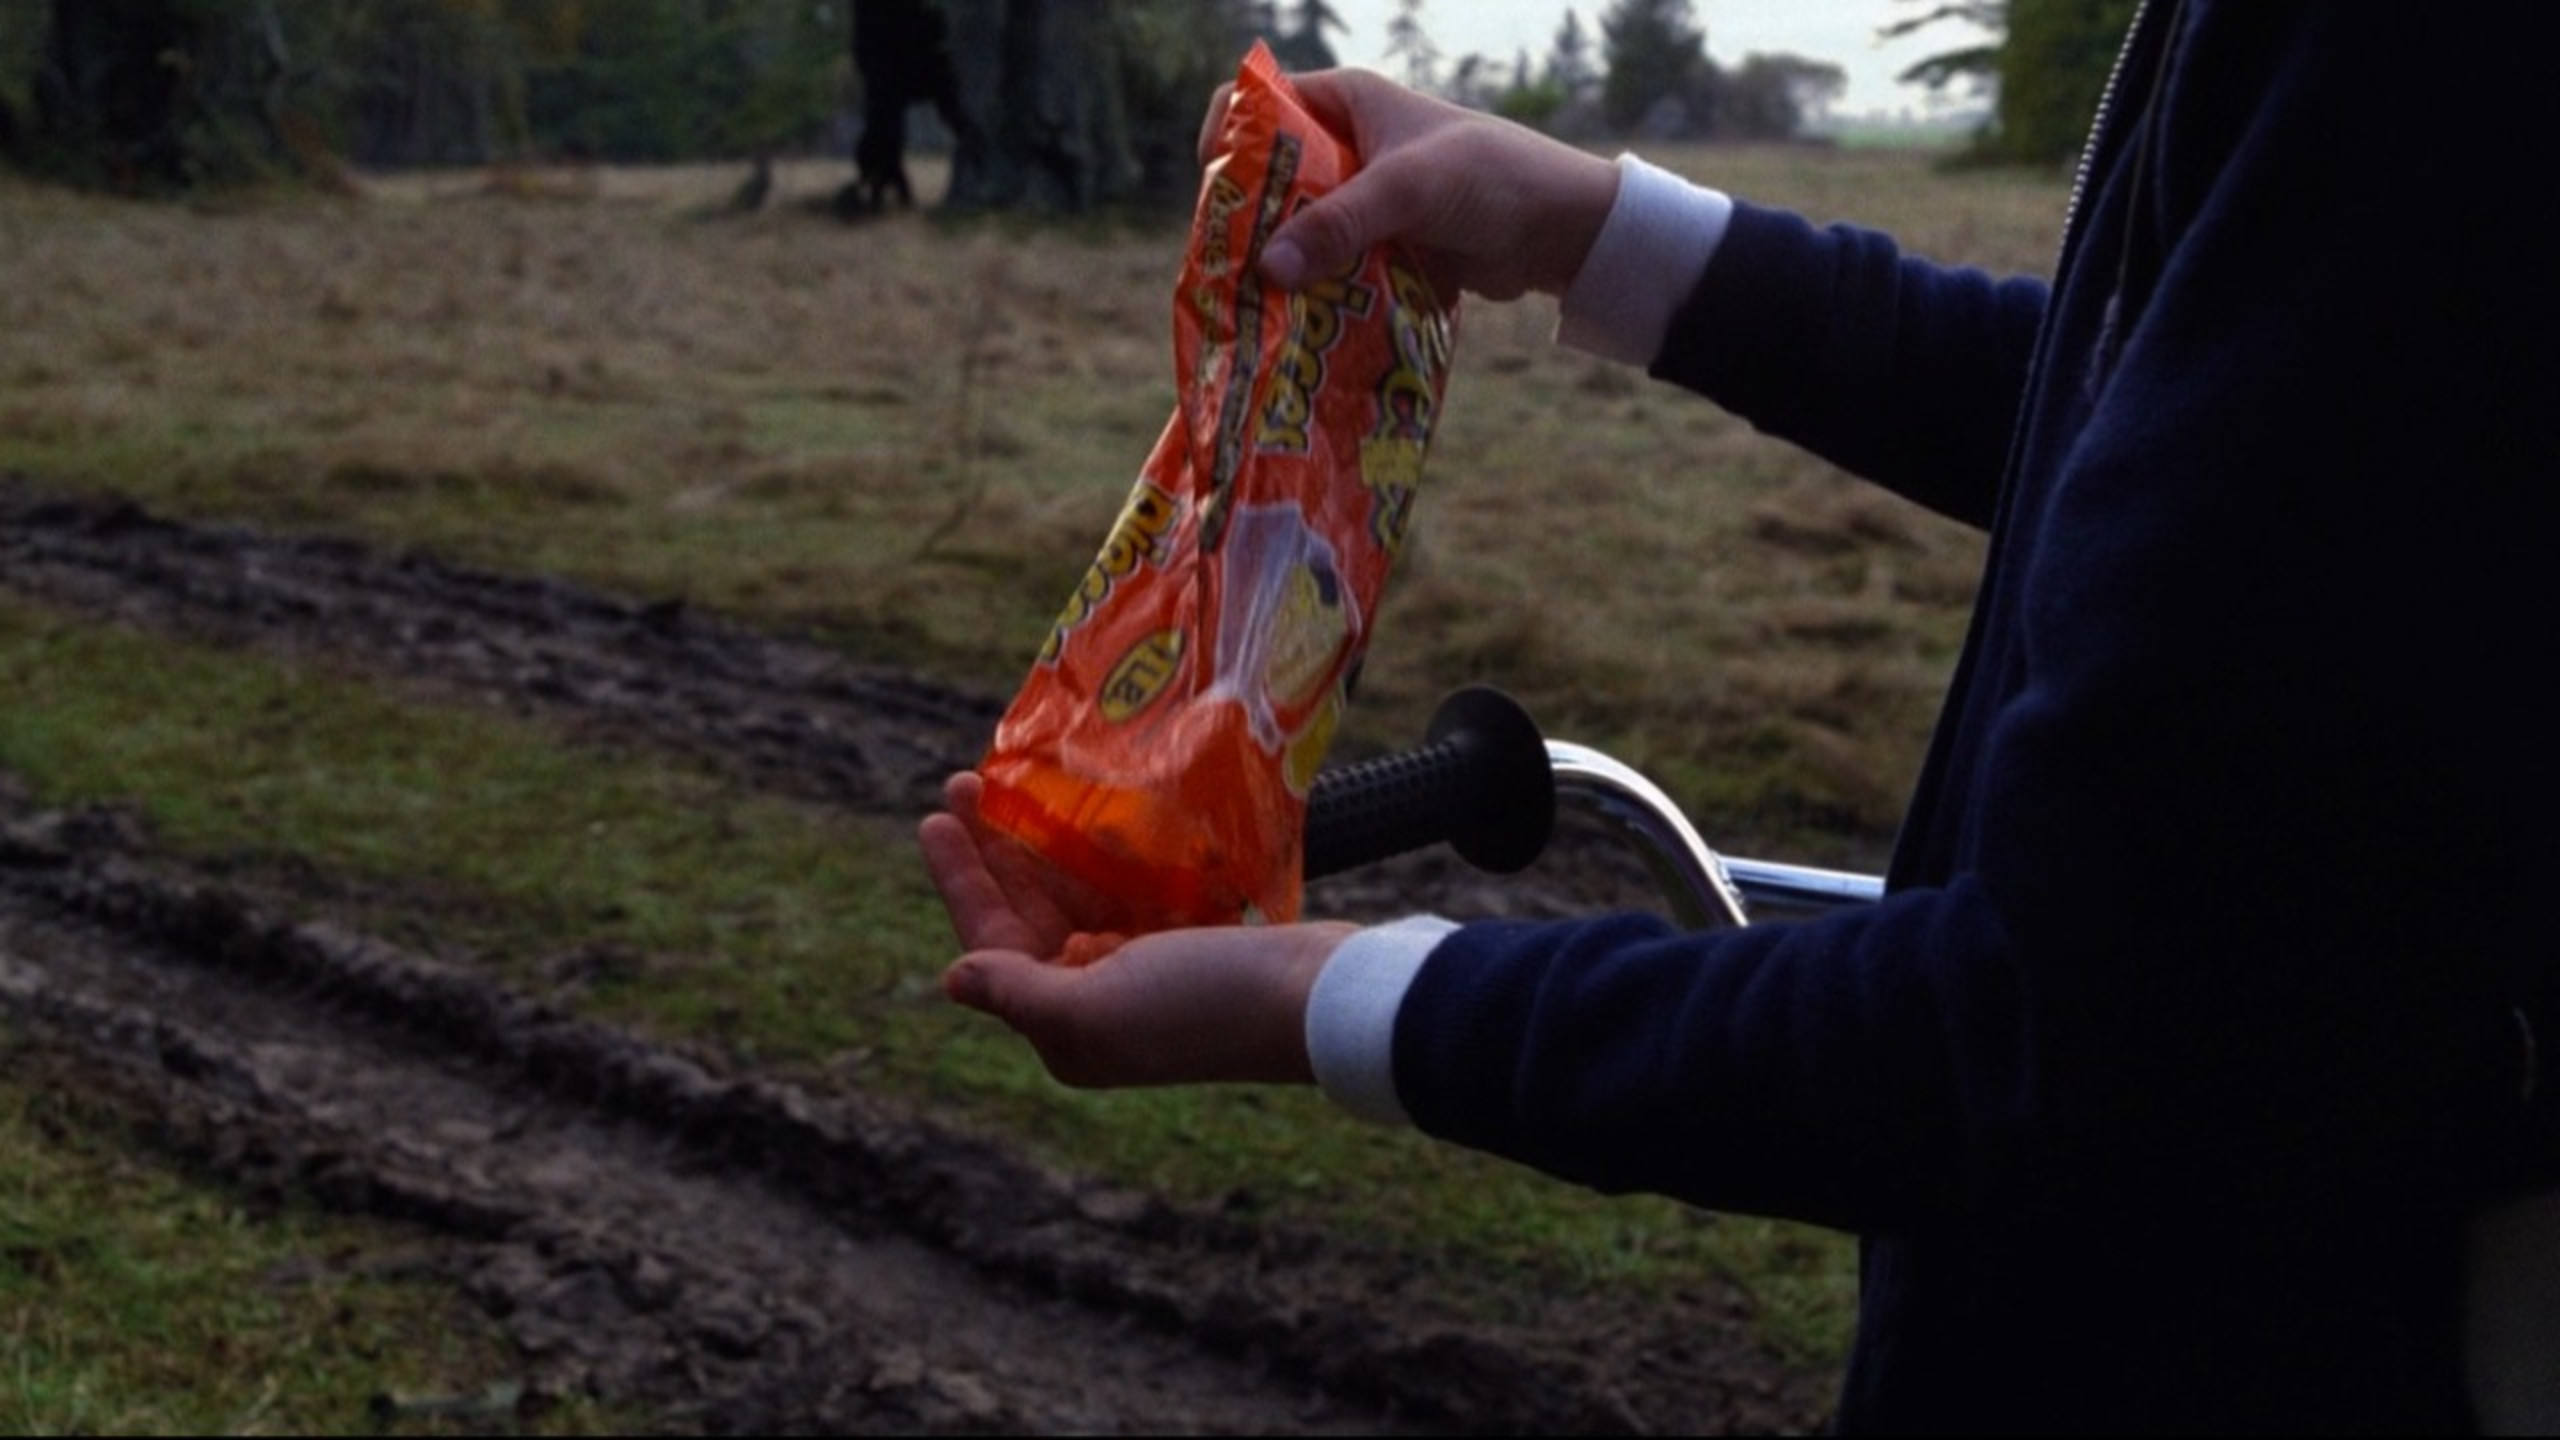 A bag of Reese's pieces featured in E.T. the Extra-Terrestrial